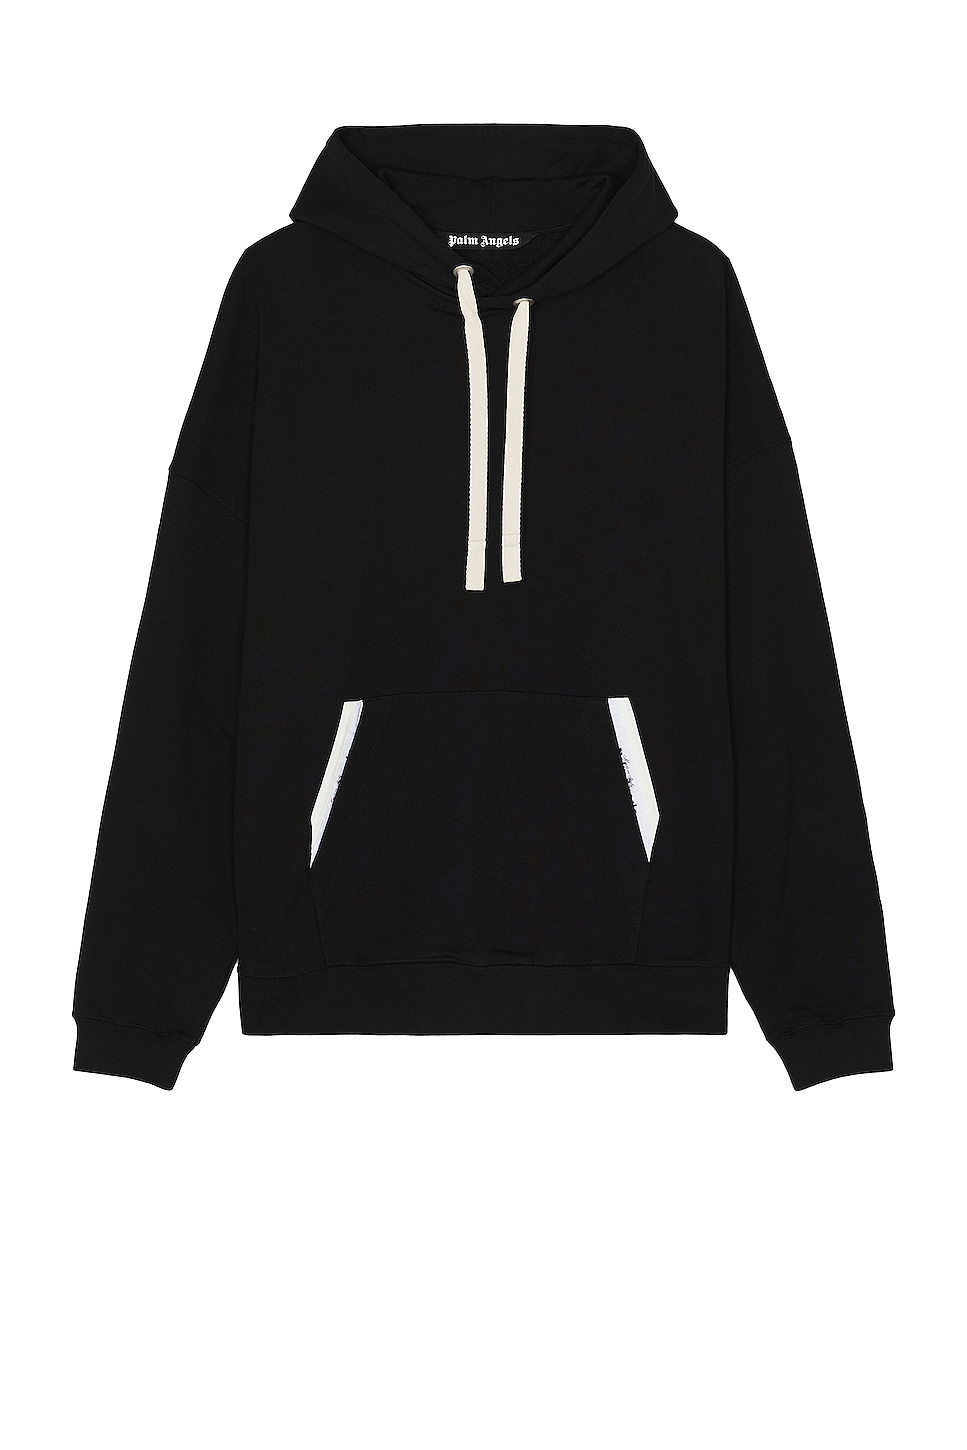 Image 1 of Palm Angels Sartorial Tape Classic Hoodie in Black